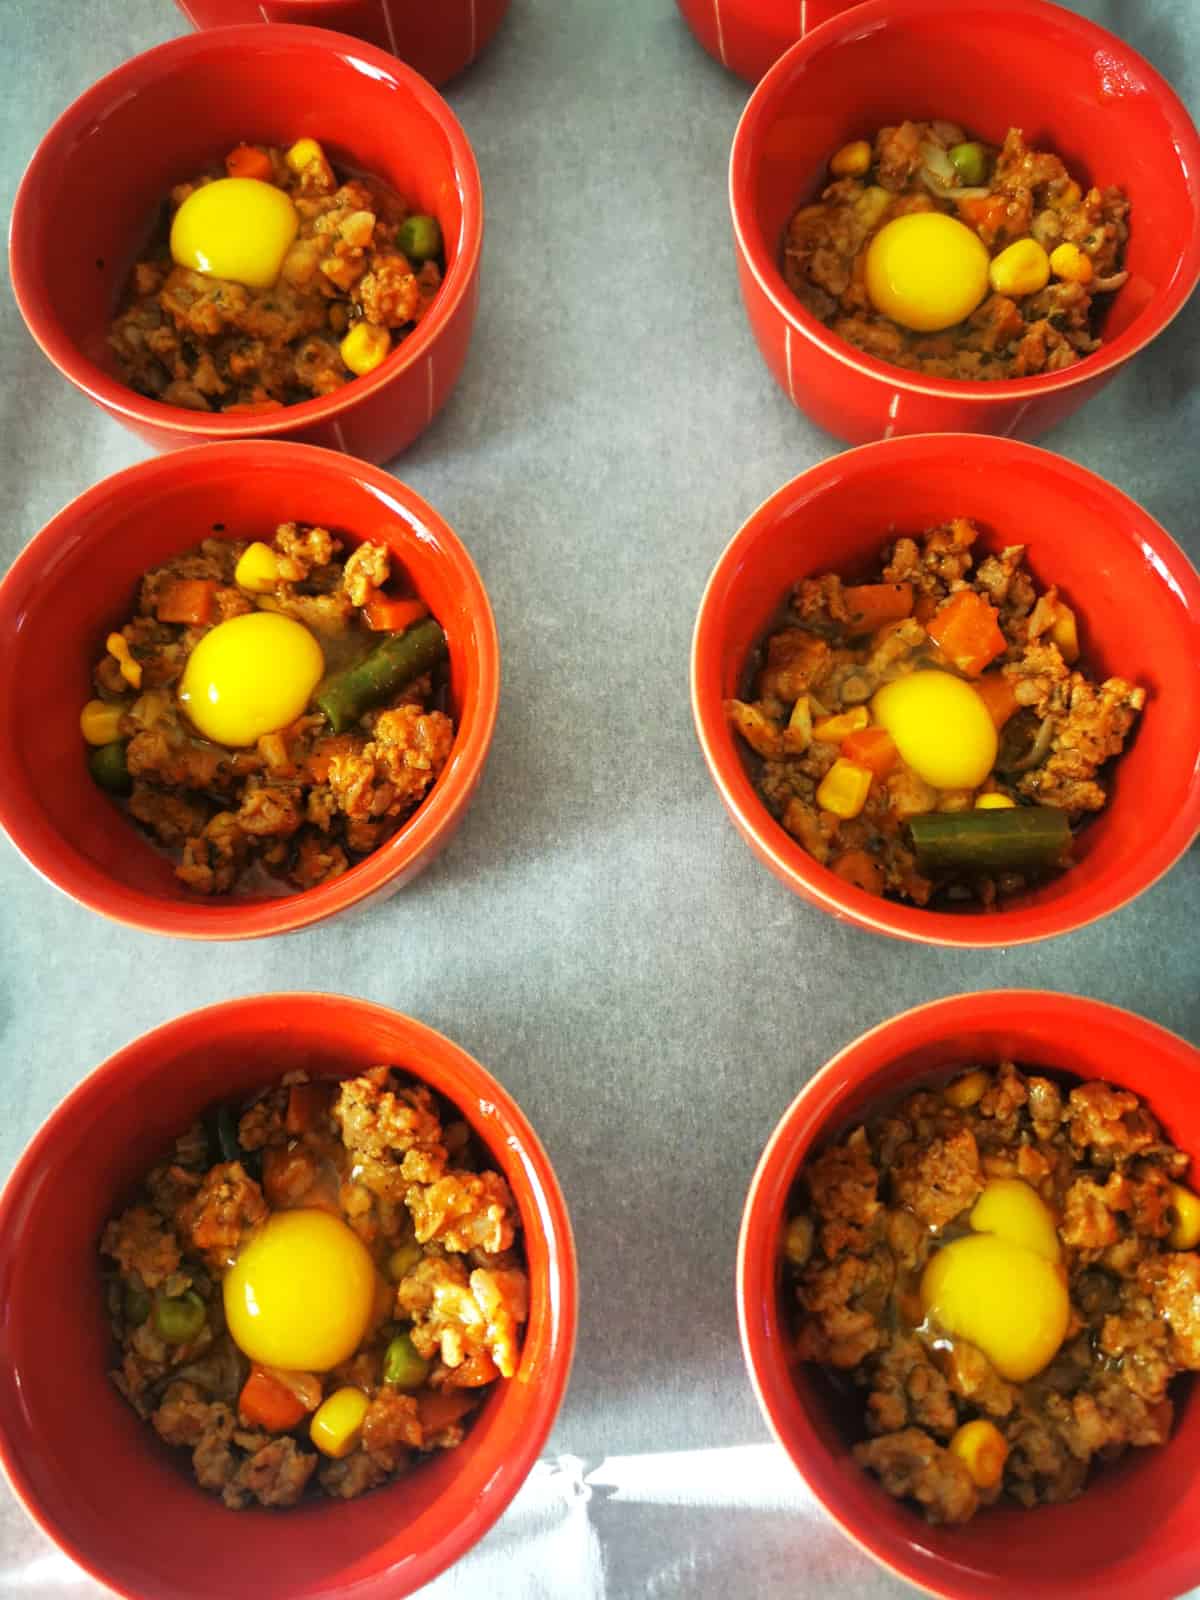 ground meat placed in small red bowls with quail egg cracked into each bowl